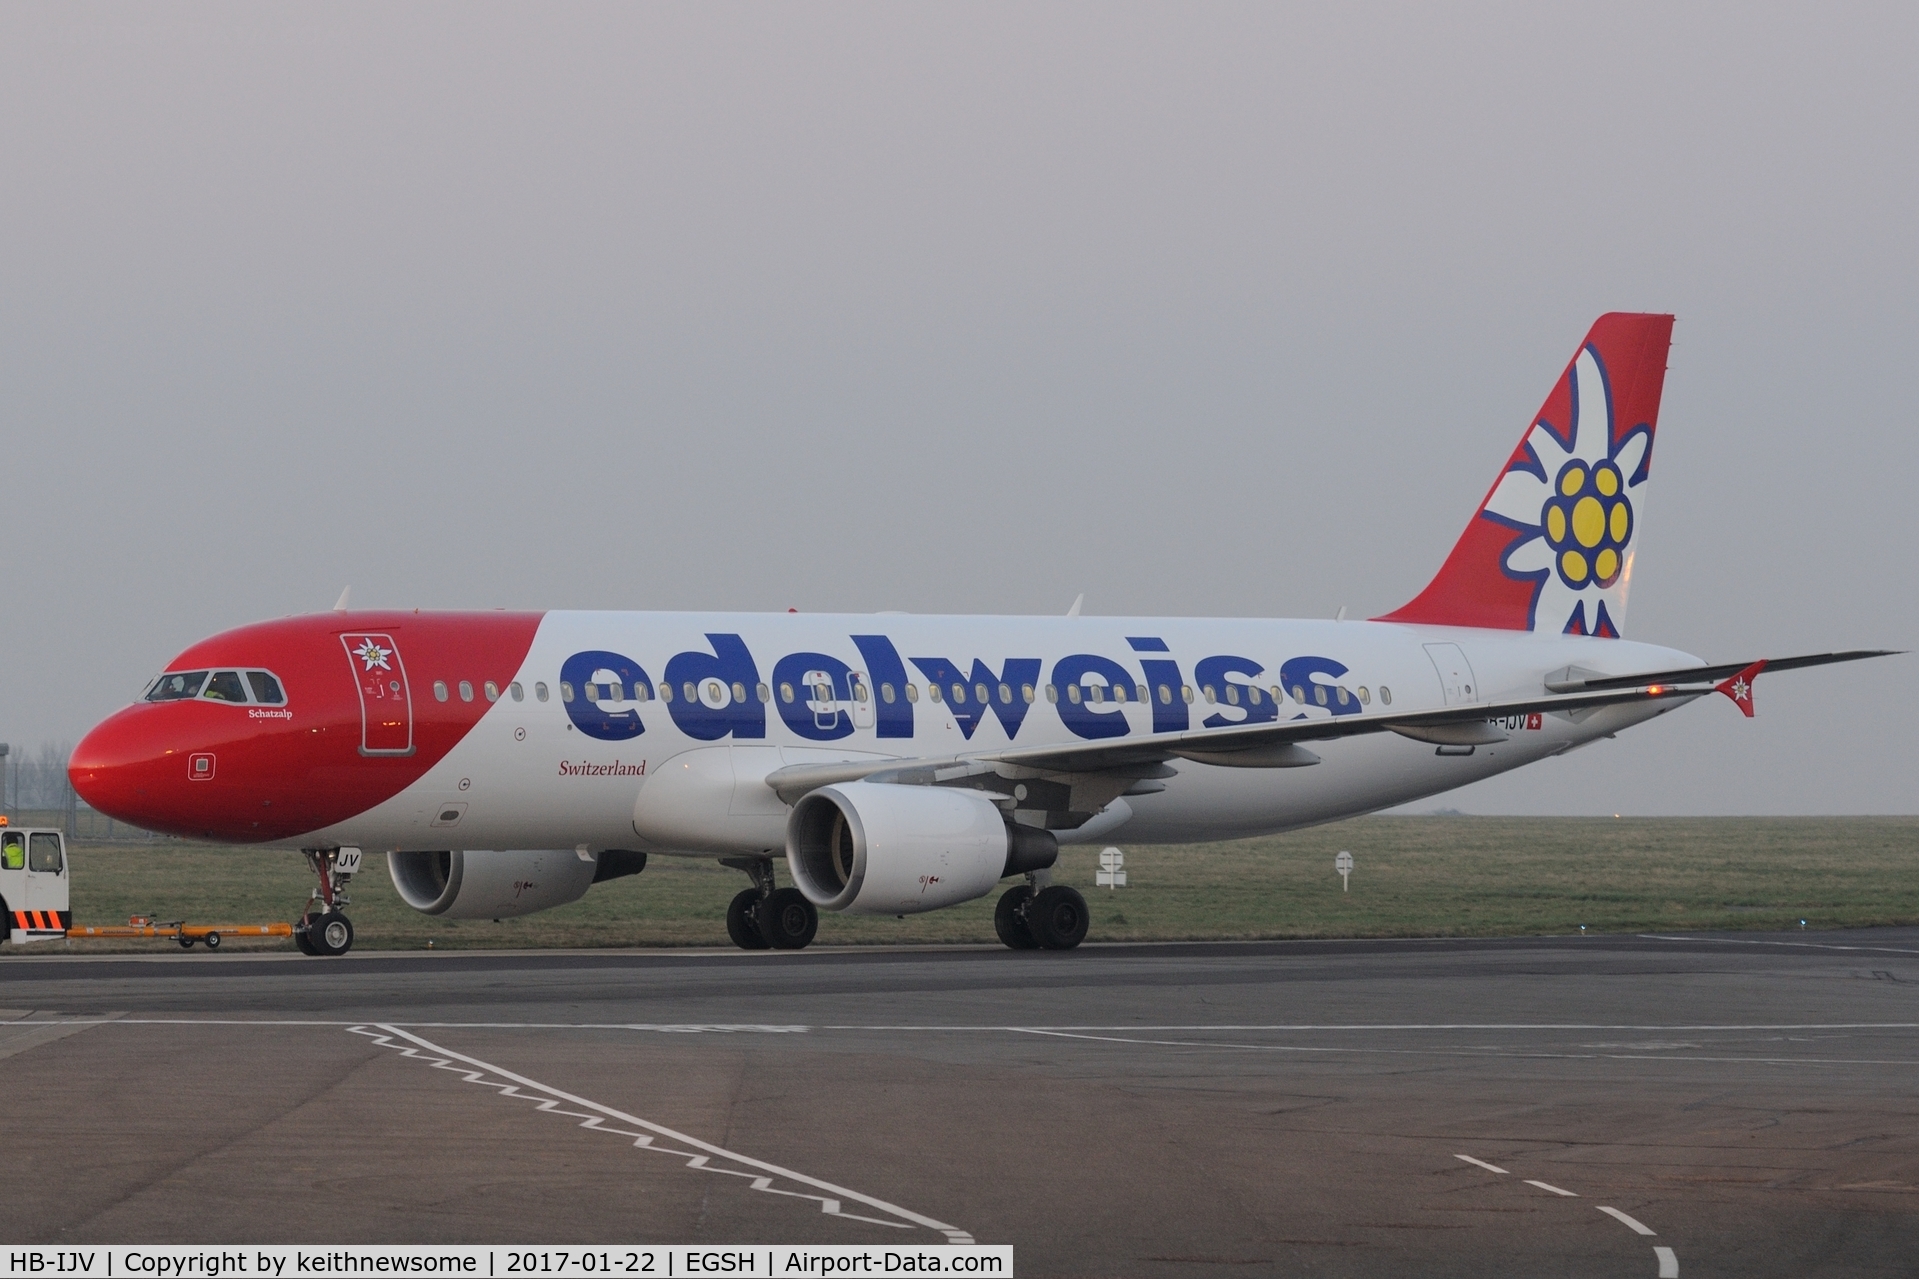 HB-IJV, 2003 Airbus A320-214 C/N 2024, Leaving with revised colour scheme.